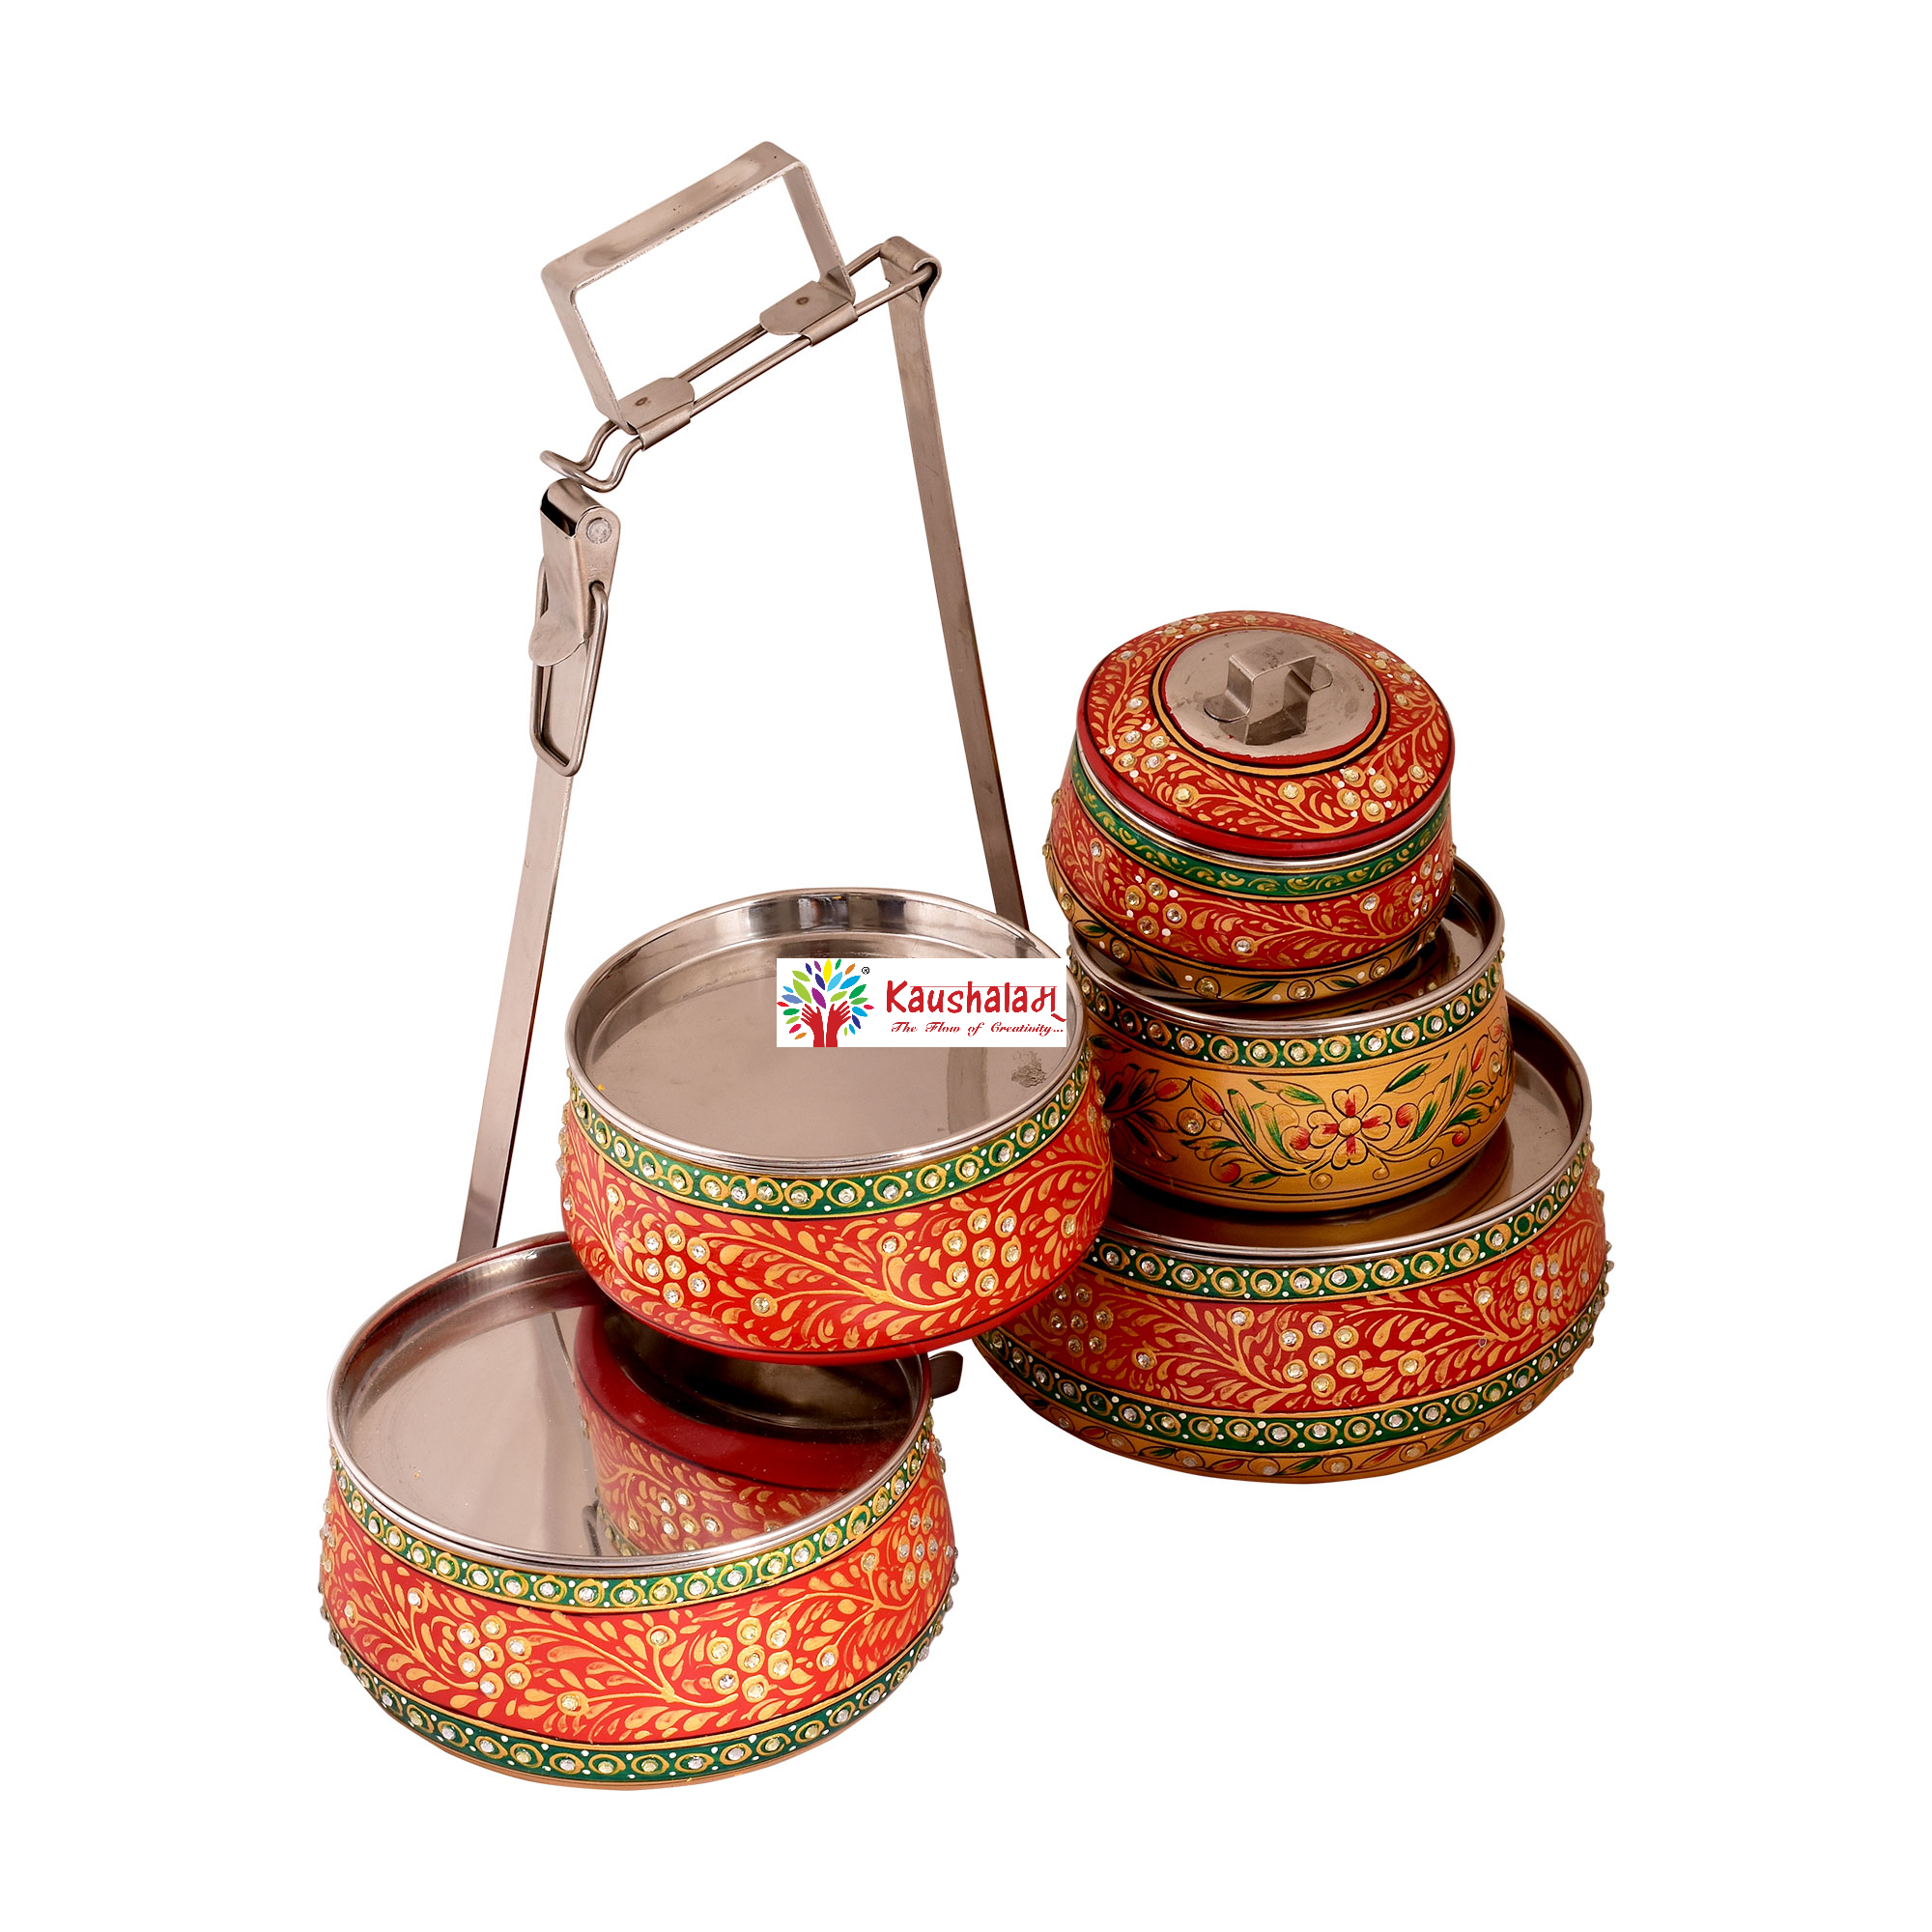 Kaushalam hand painted 5 tier steel pyramid tiffin, Lunch box, Meal for family, Picnic box, large Bento box, Christmas gift, reusable tiffin